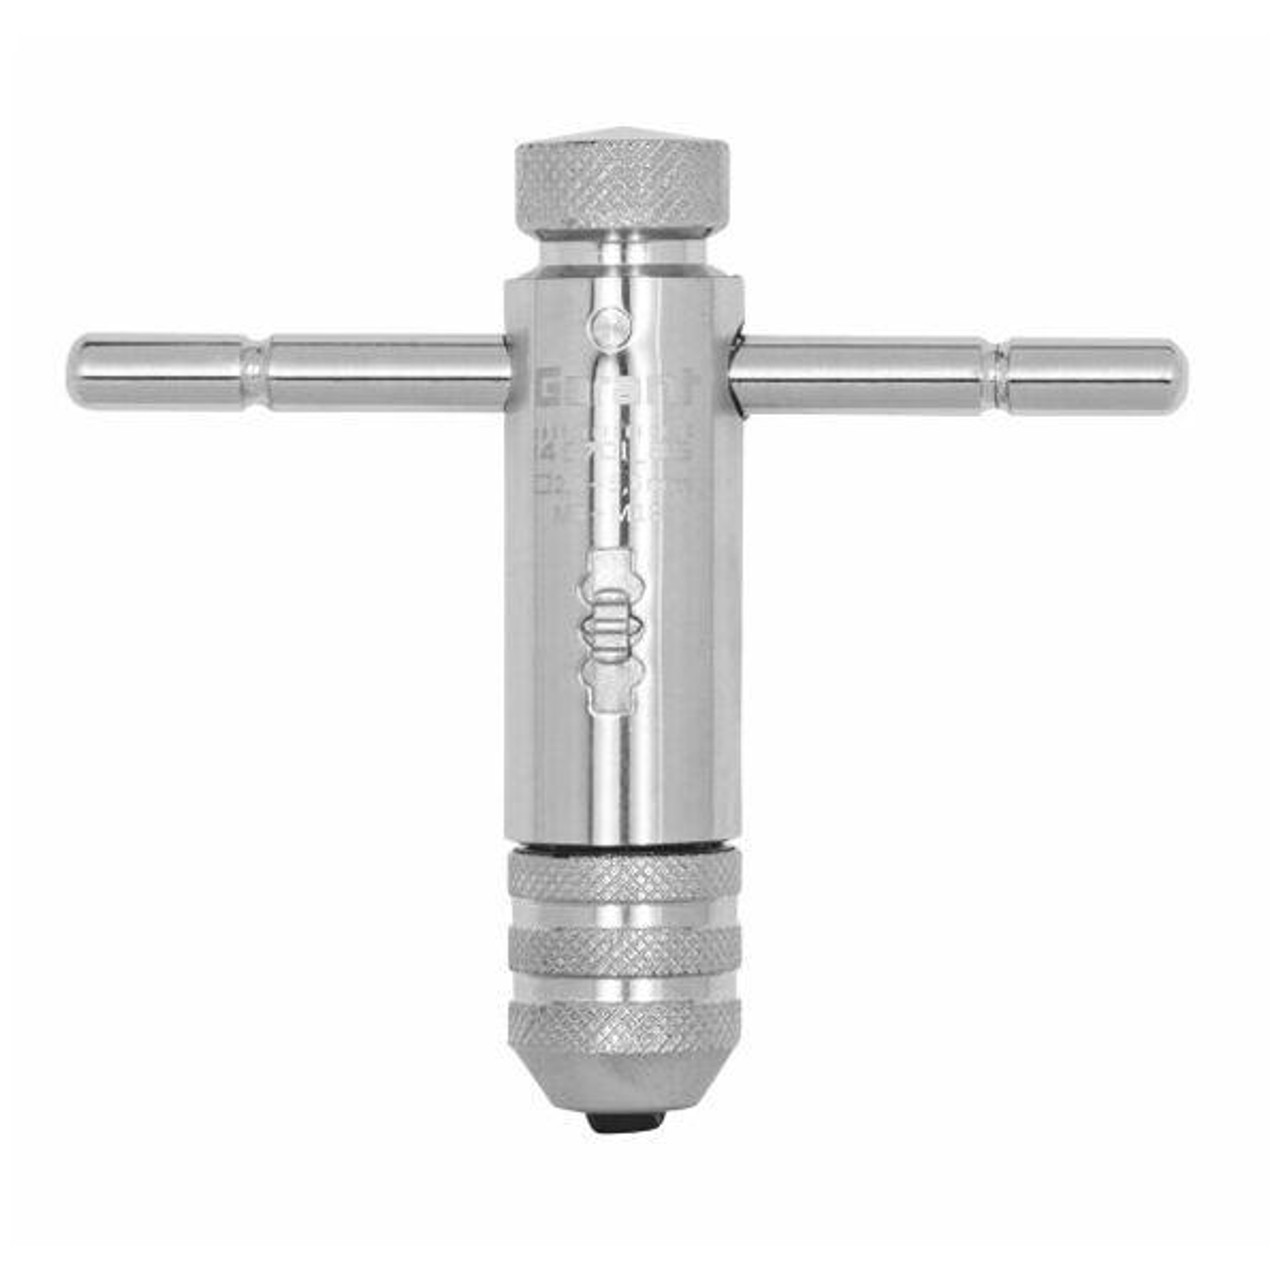 Garant T-Tap Wrench with Ratchet